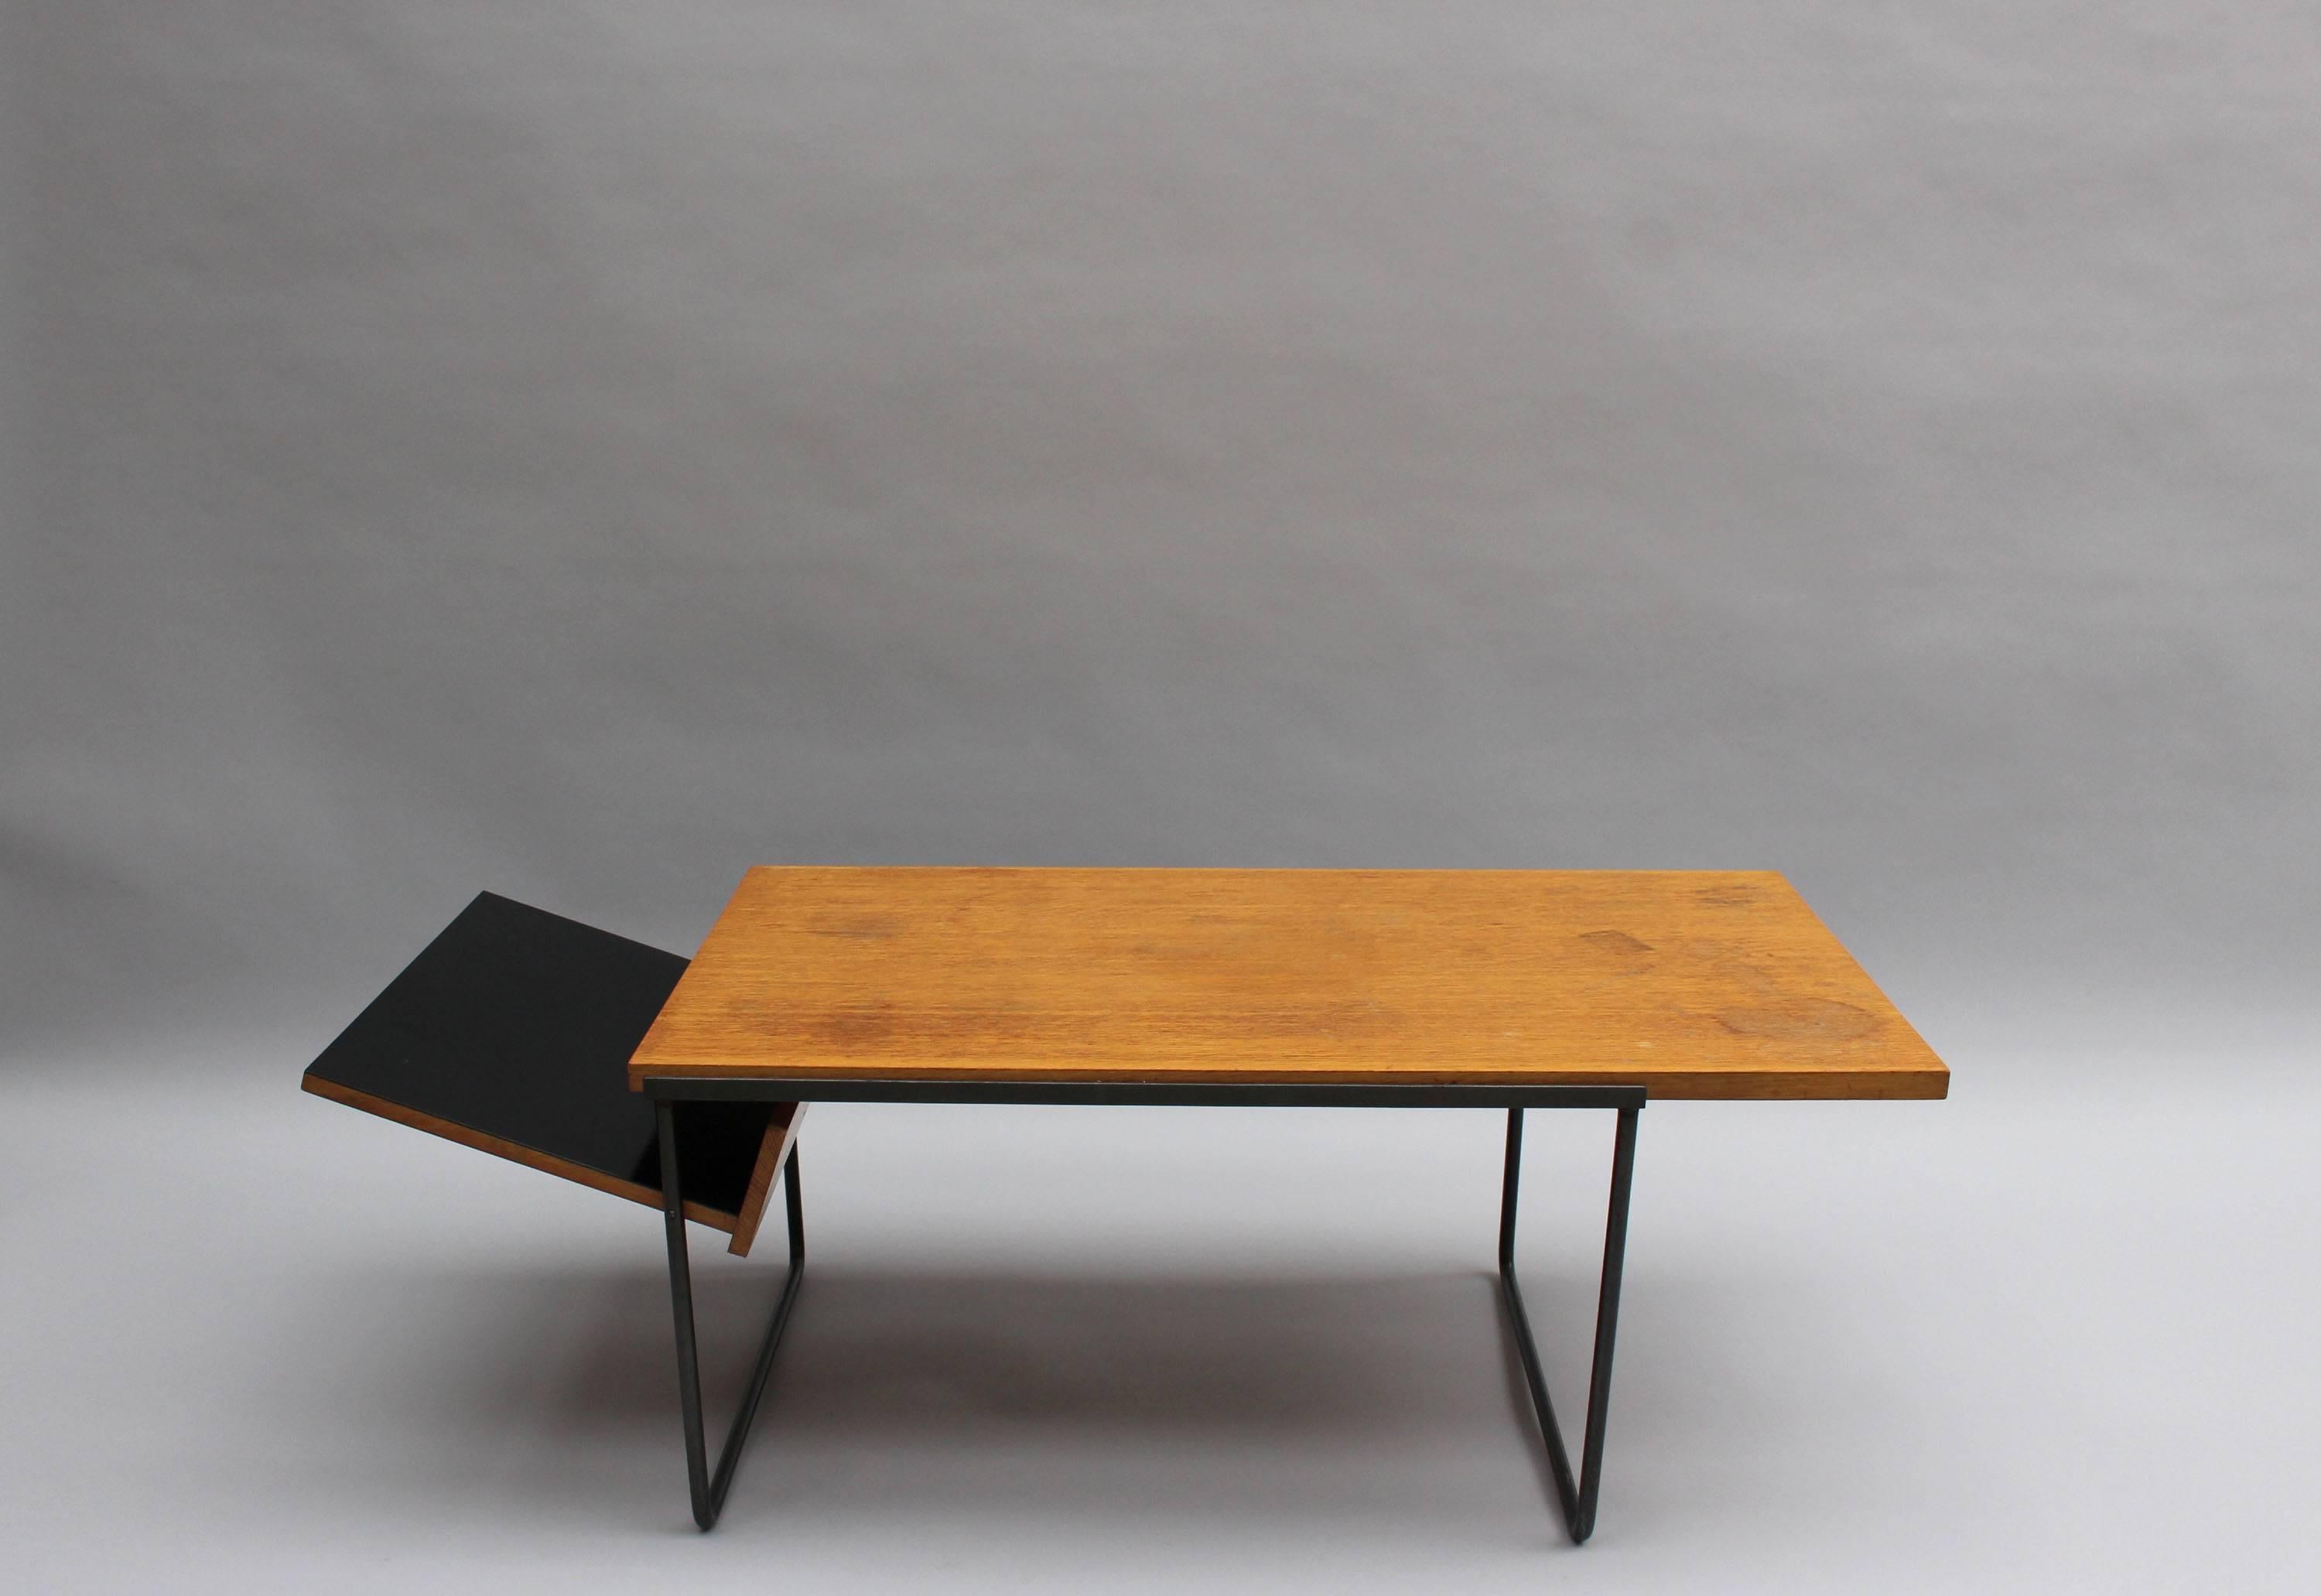 A fine French 1950's coffee table with a black lacquered metal base, an oak top and a black laminated magazine holder.